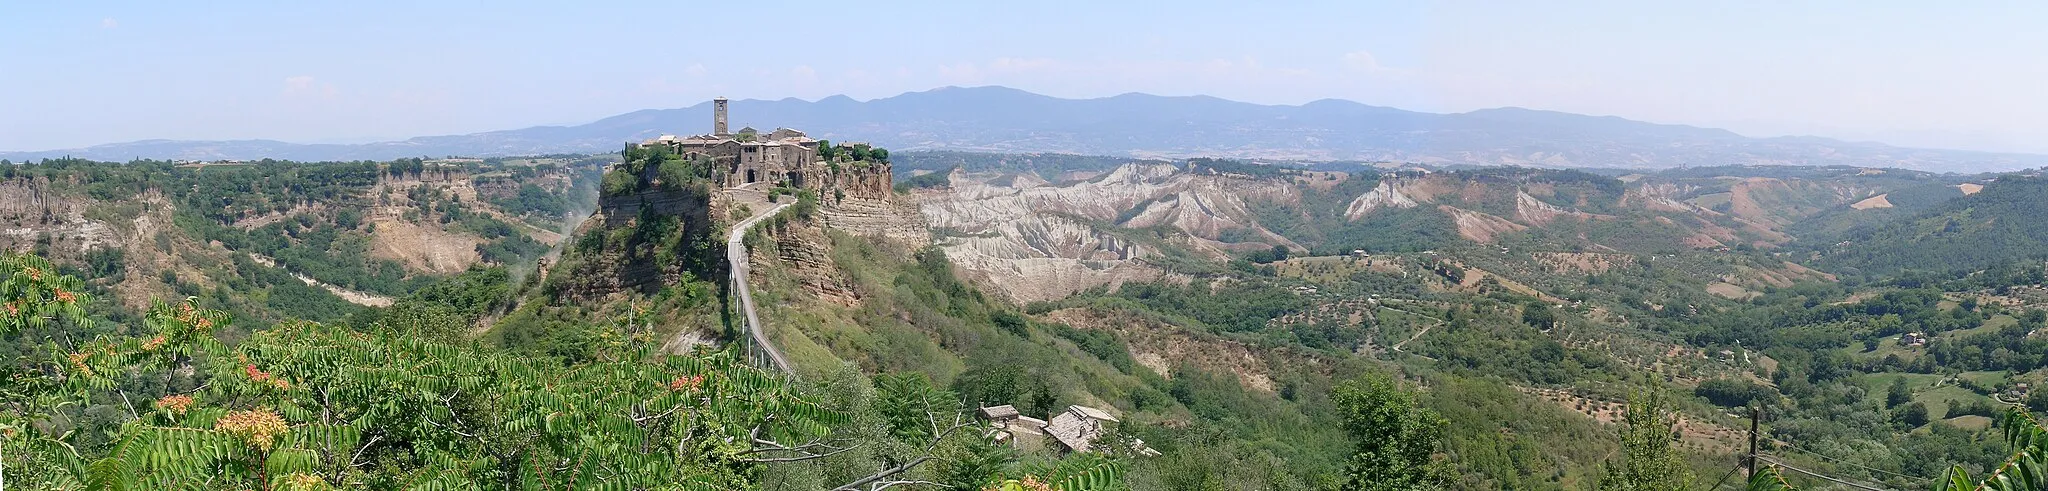 Photo showing: Bagnoregio is a small town in Lazio, Italy. The old part, called "civita", is on the top of the hill. This picture shows the "civita" and the surroundings, under a strong summertime sun, it's a panorama made of 3 pictures stitched together